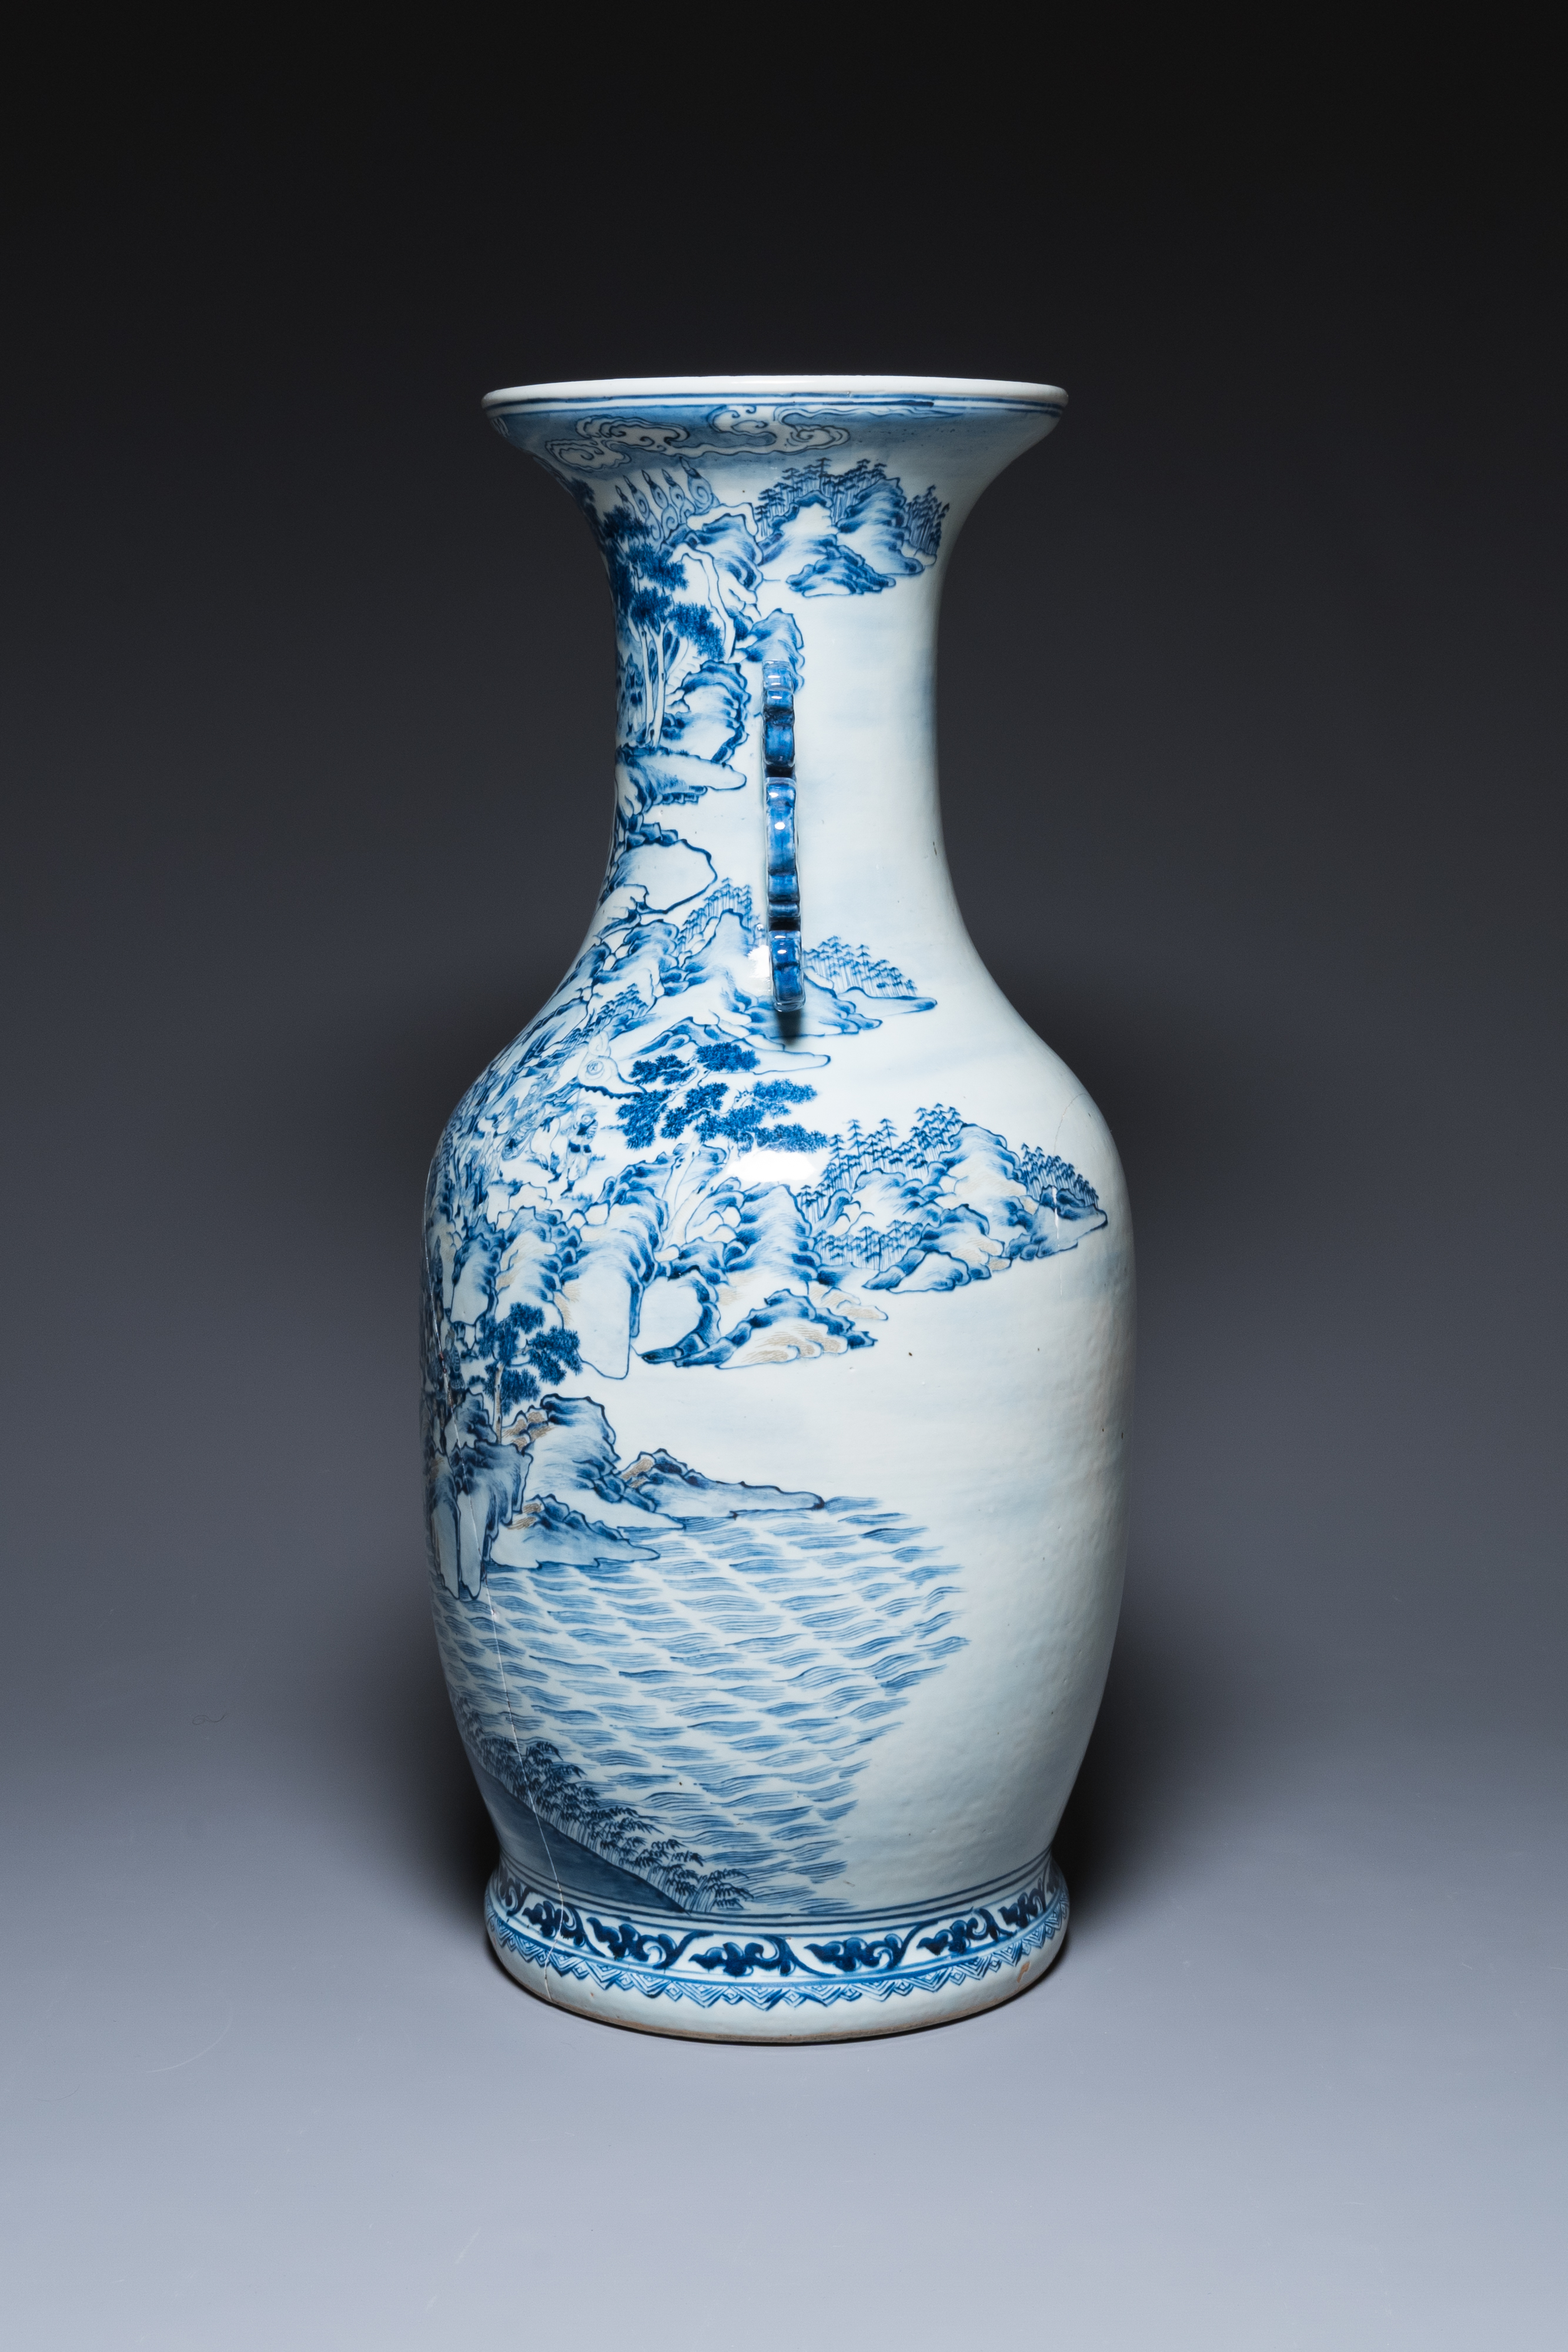 A large Chinese blue, white and copper-red vase with a mountainous river landscape, 19th C. - Image 4 of 6